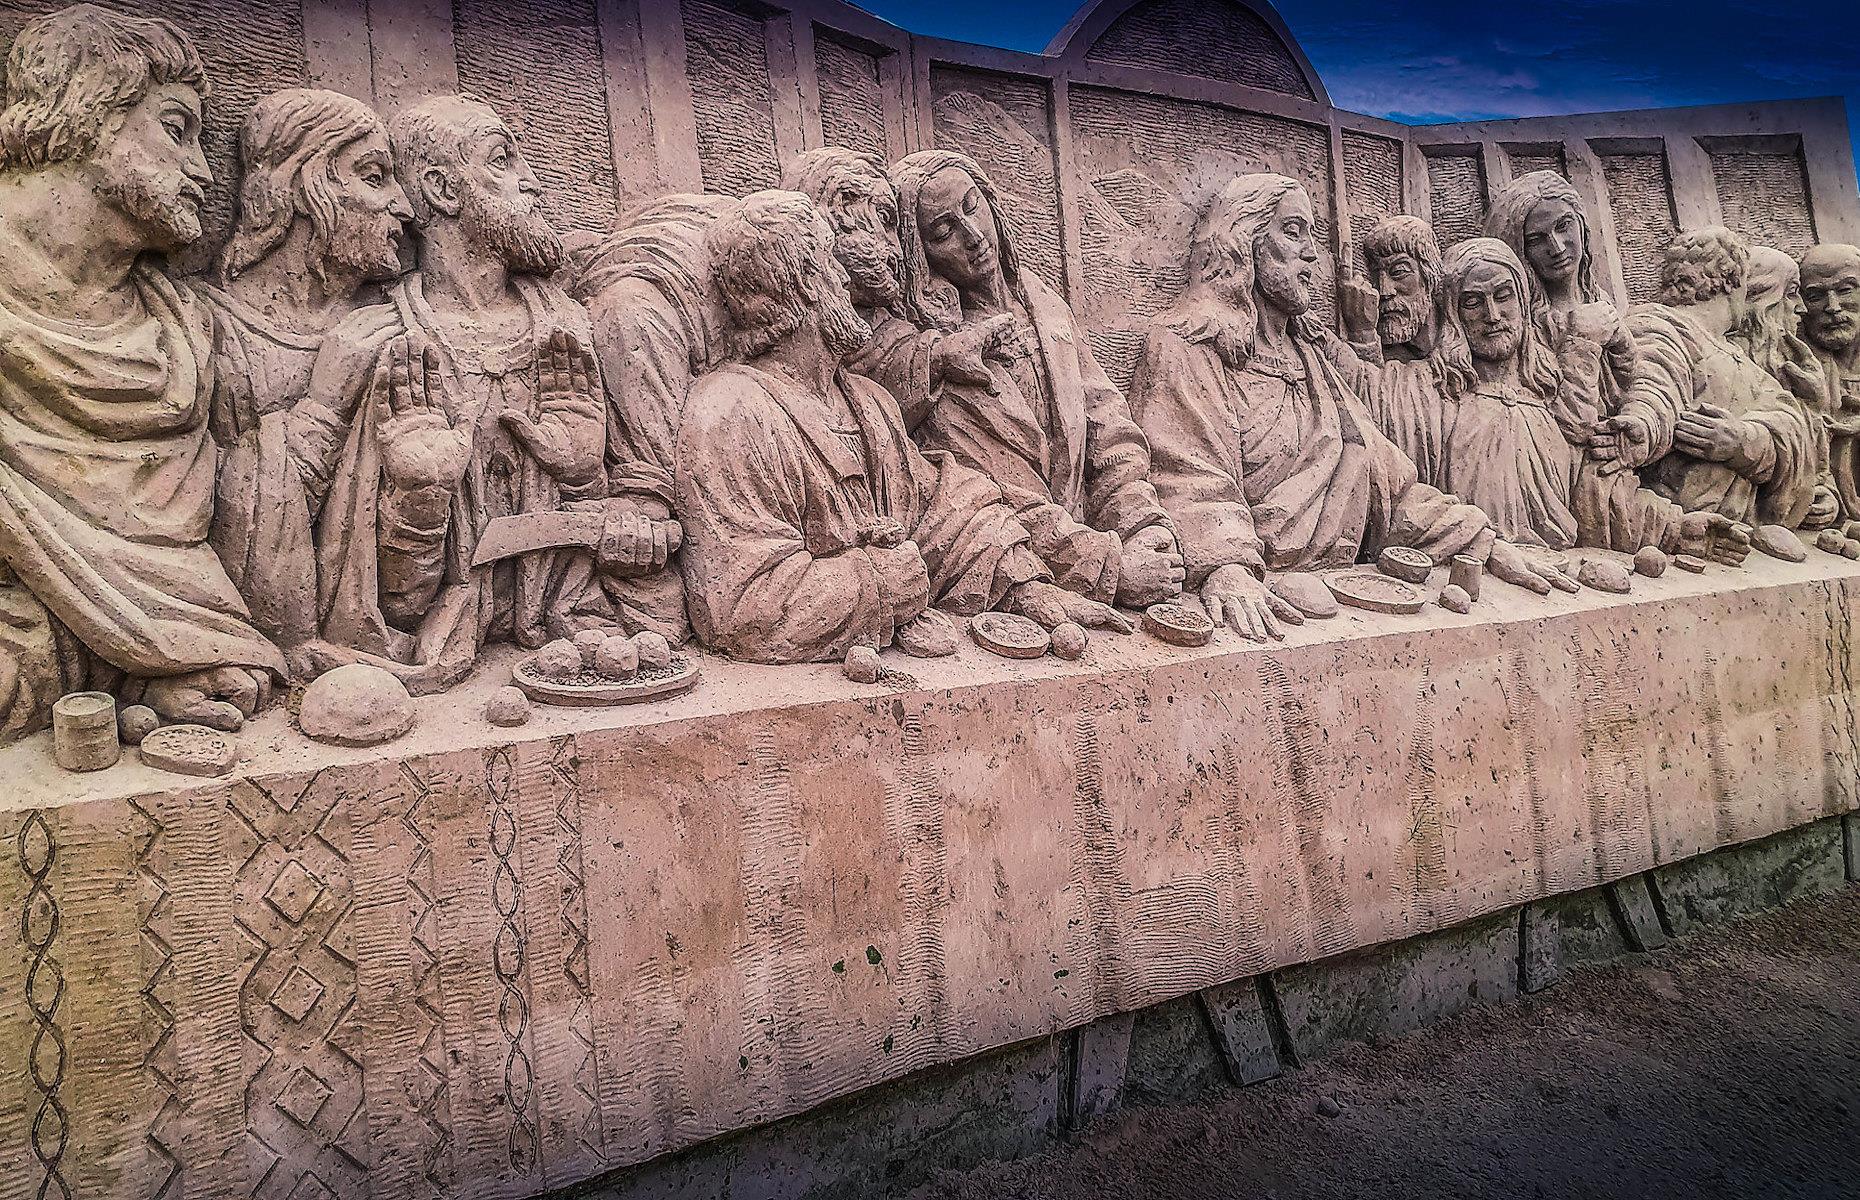 This detailed biblical scene portraying Jesus' last supper was created as part of Rügen’s 2020 Sand Sculpture Festival. It was one of many incredible motifs at the event that had a theme of the Bible. Noah’s Ark and Jesus carrying the cross were also part of the stirring sand sculpture display. The island’s annual festival usually attracts around 200,000 visitors every year.